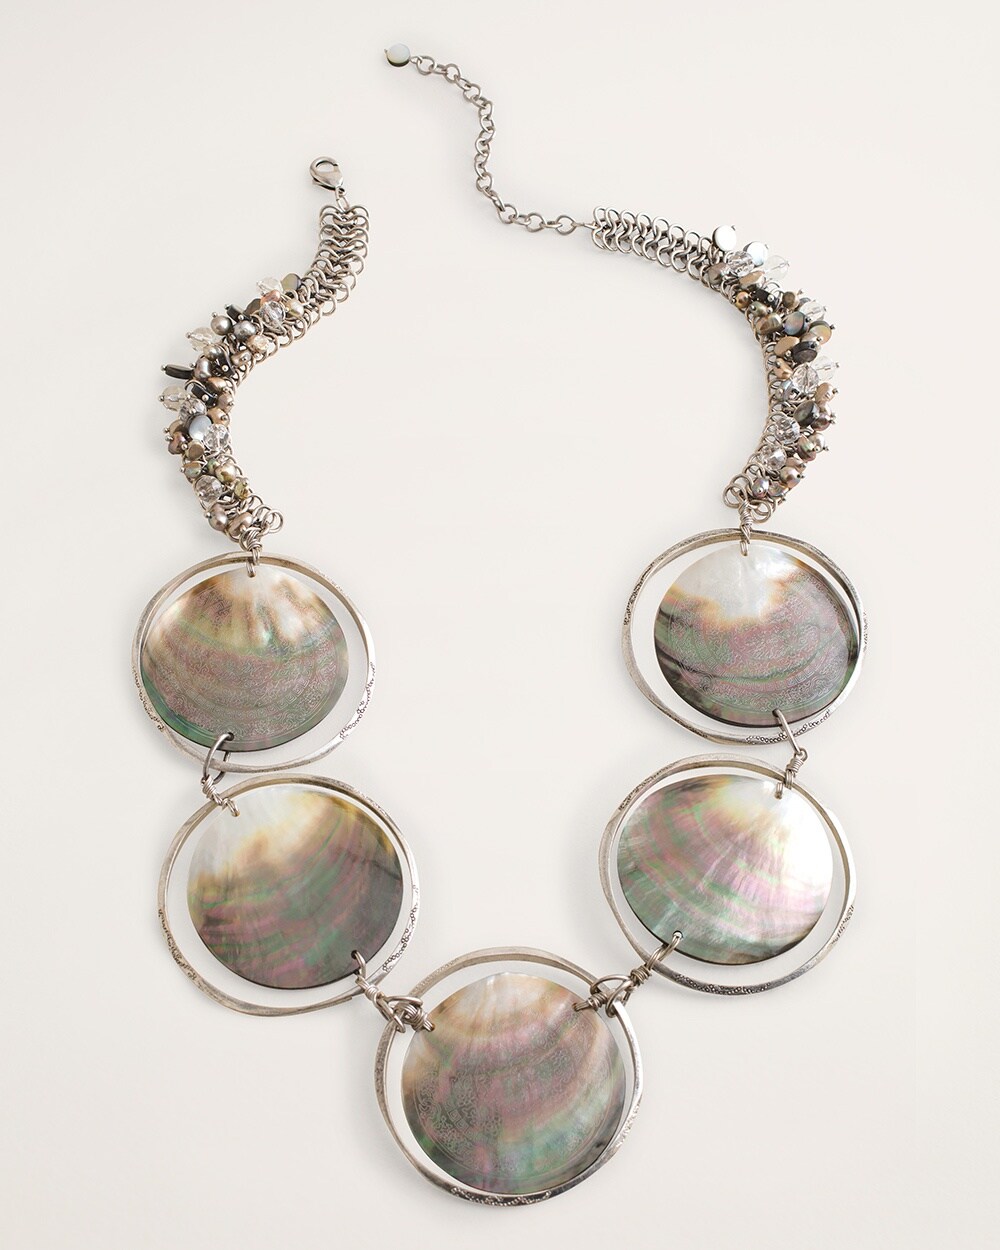 Shell and Bead Bib Necklace